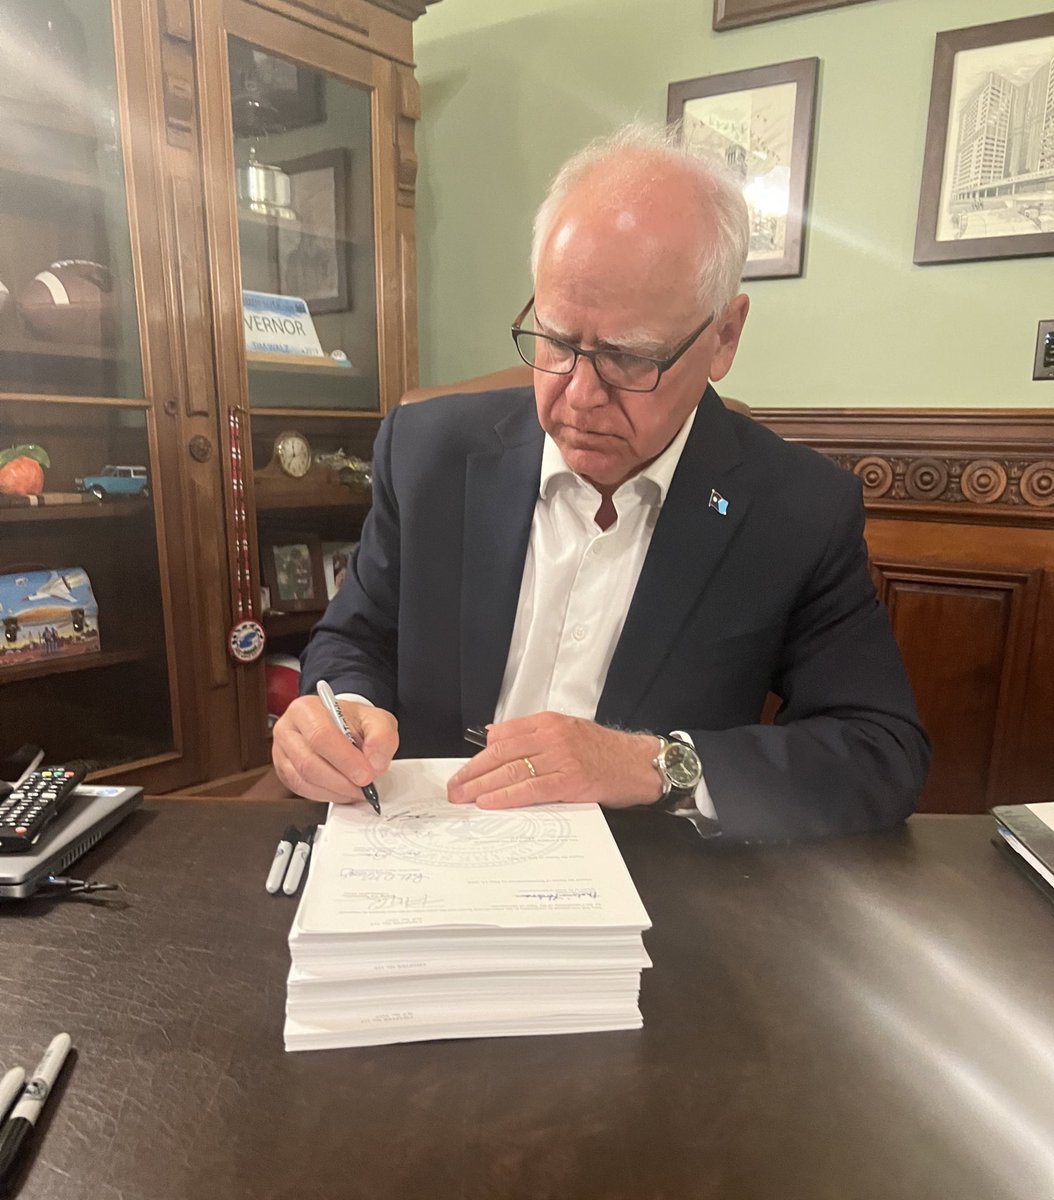 NEW: I just signed the education bill into law – expanding access to pre-k, improving literacy, and feeding kids. We’re making progress this legislative session to make Minnesota the best state in the country for kids. Let’s keep going!